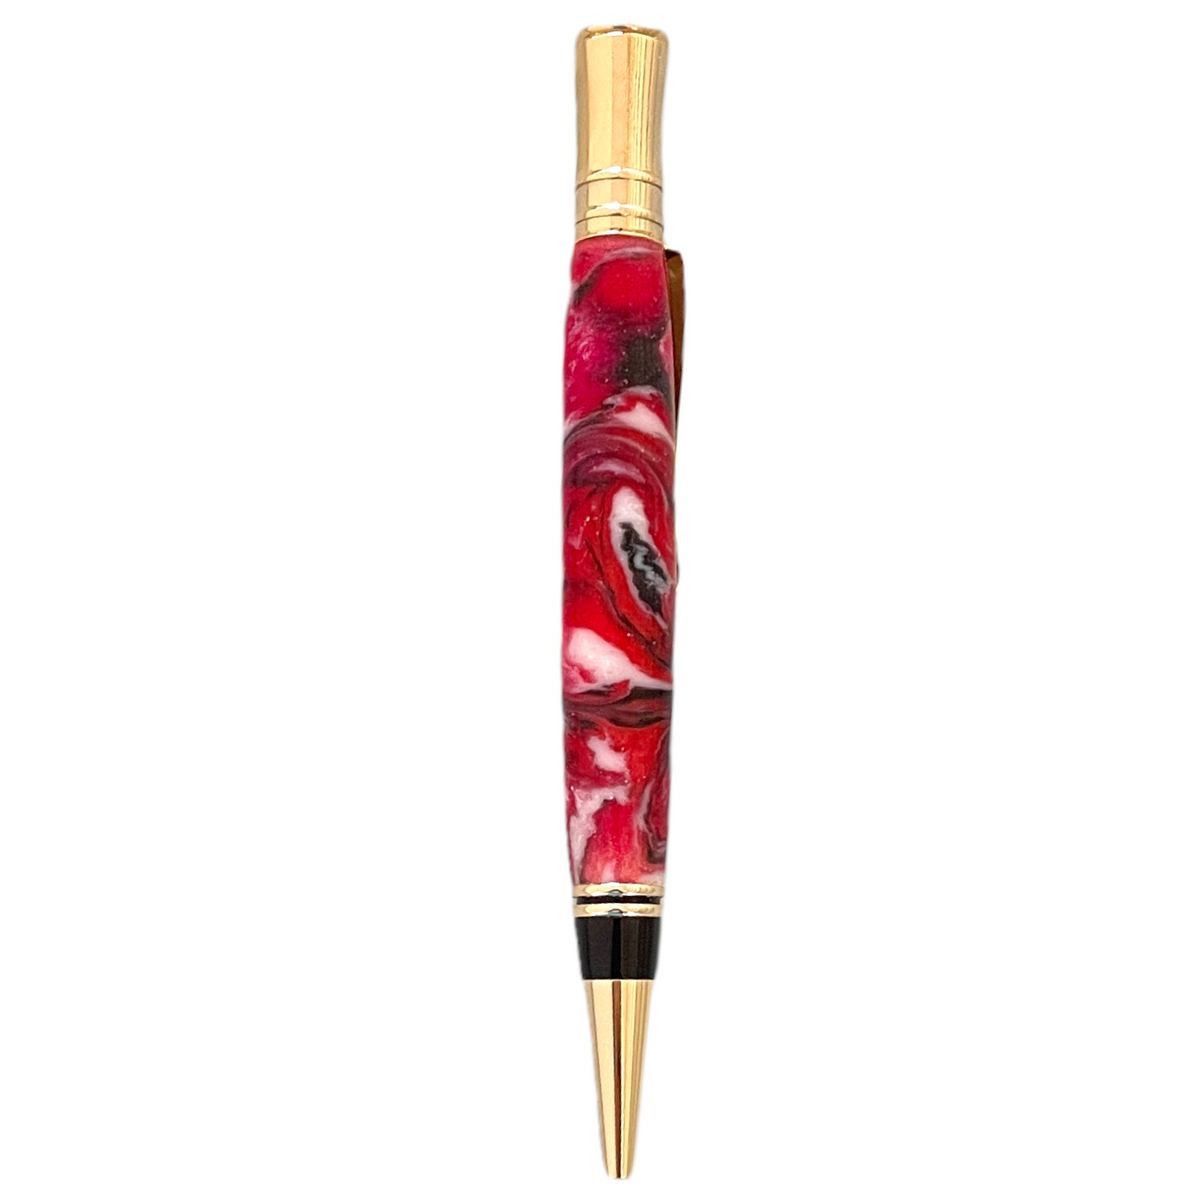 Ladybug Executive Pen With Gold  Trim Pens Paul's Hand Turned Creations   